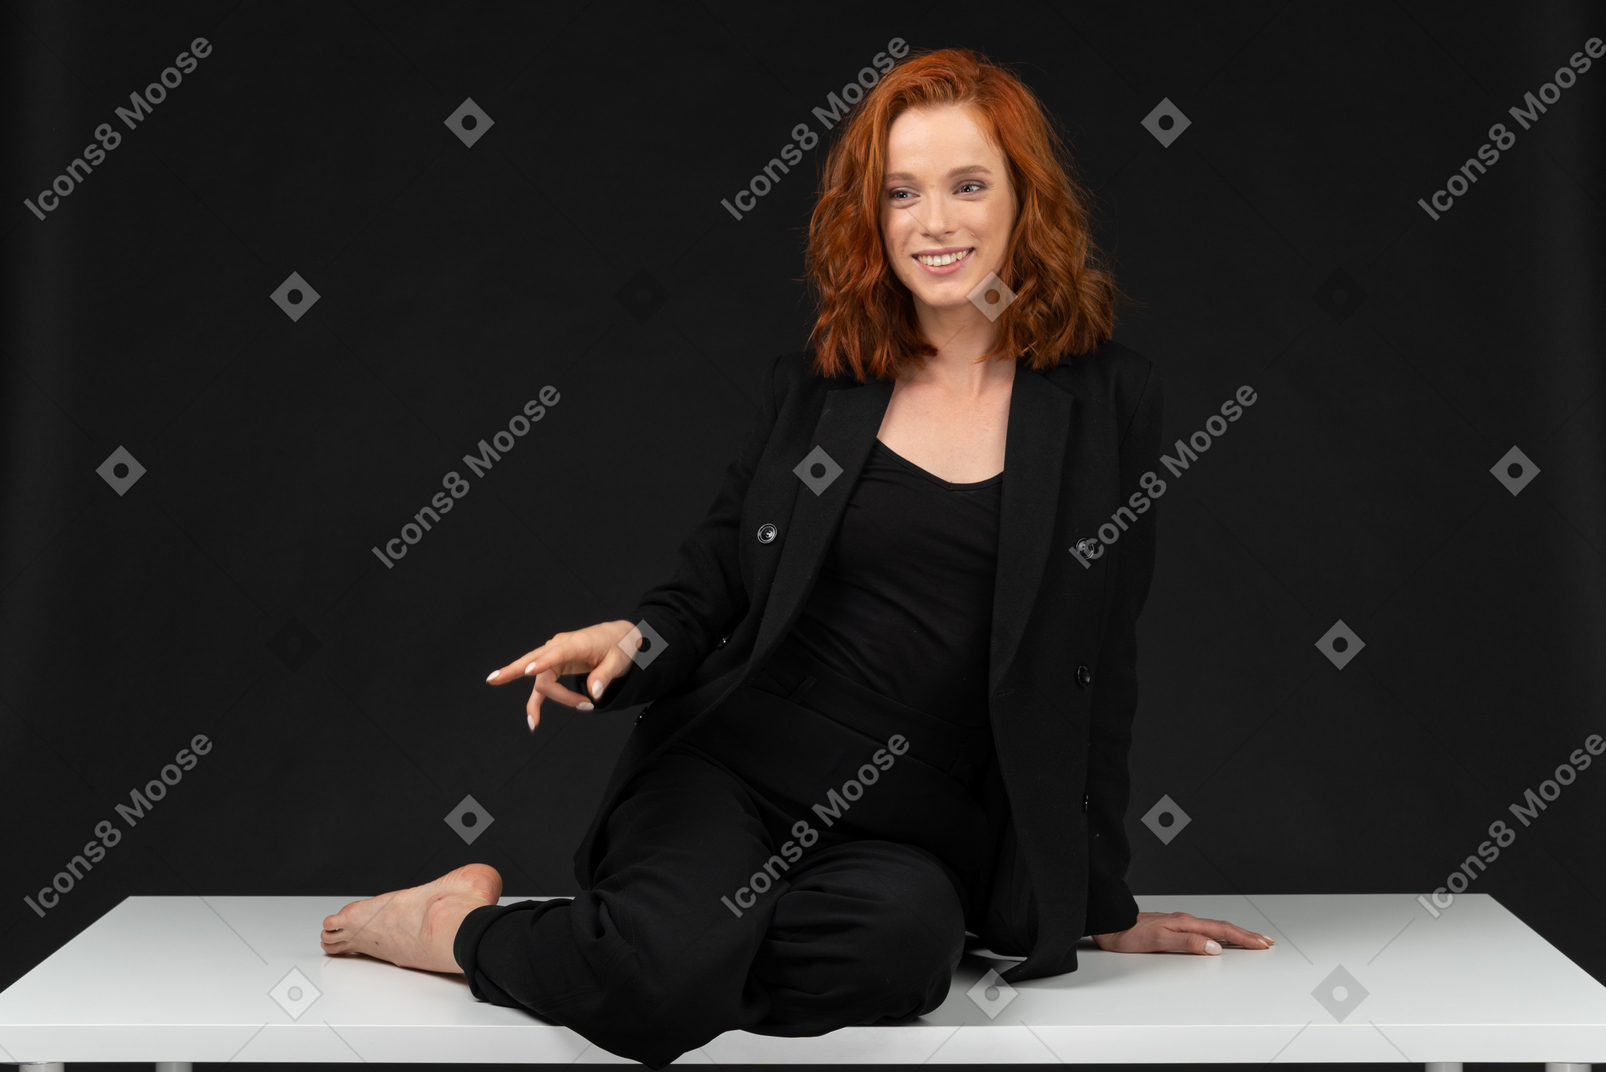 A frontal view of the young smiling woman dressed in black and sitting on the table